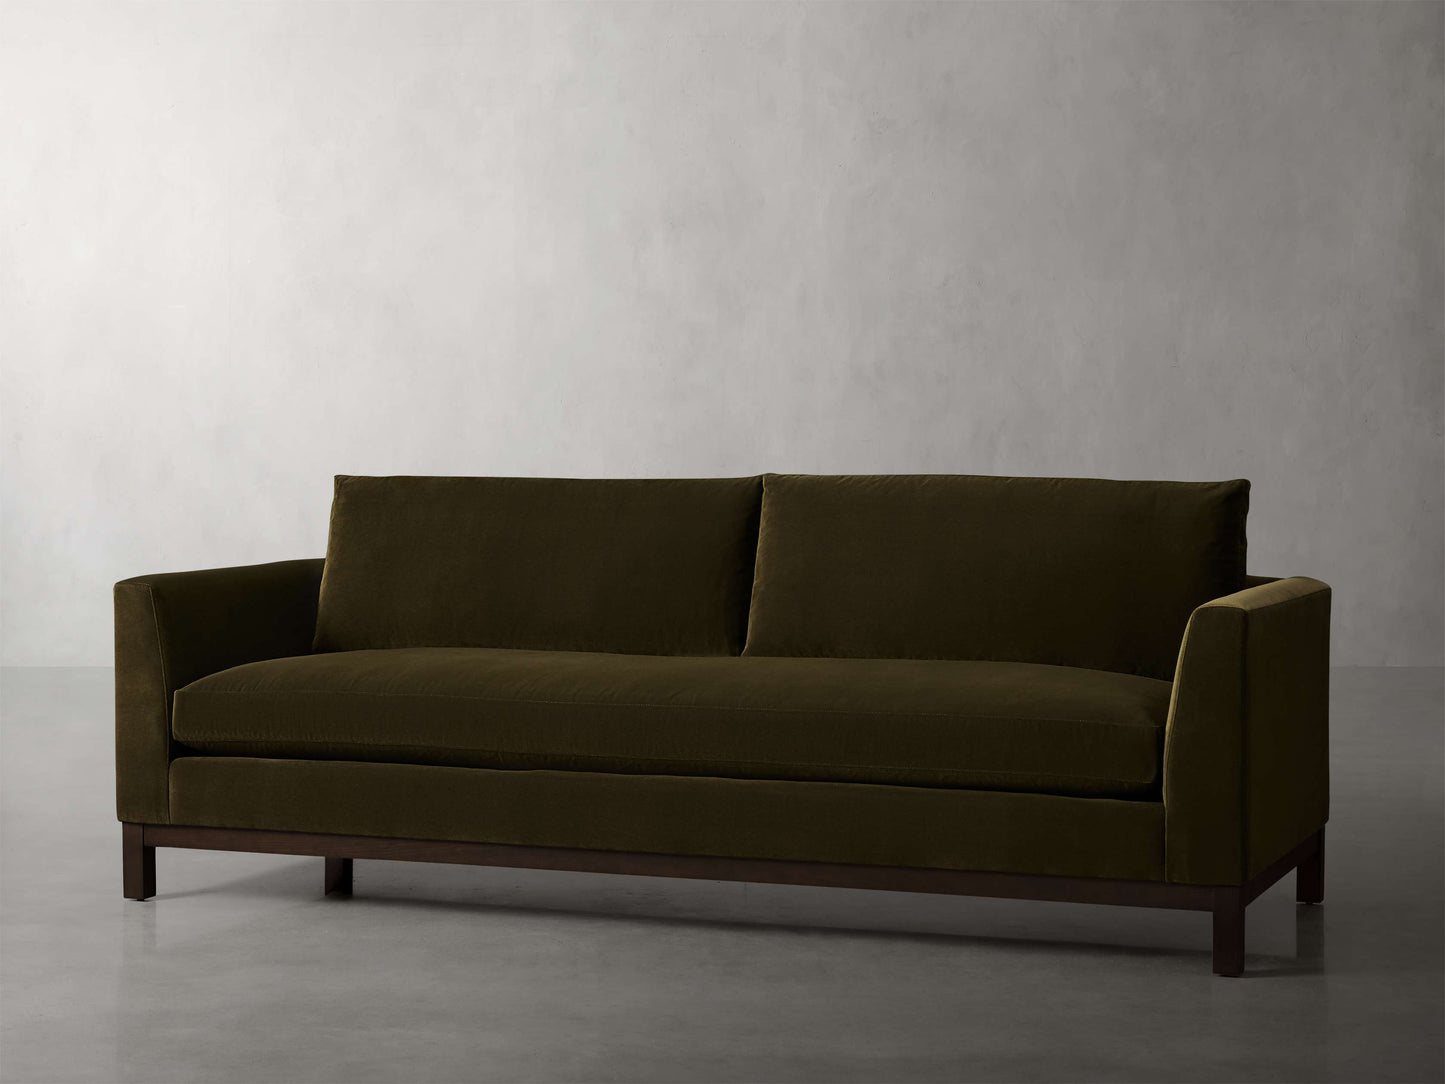 Everett Bench-Seat Sofa by Arhaus (in Vanni Olive)